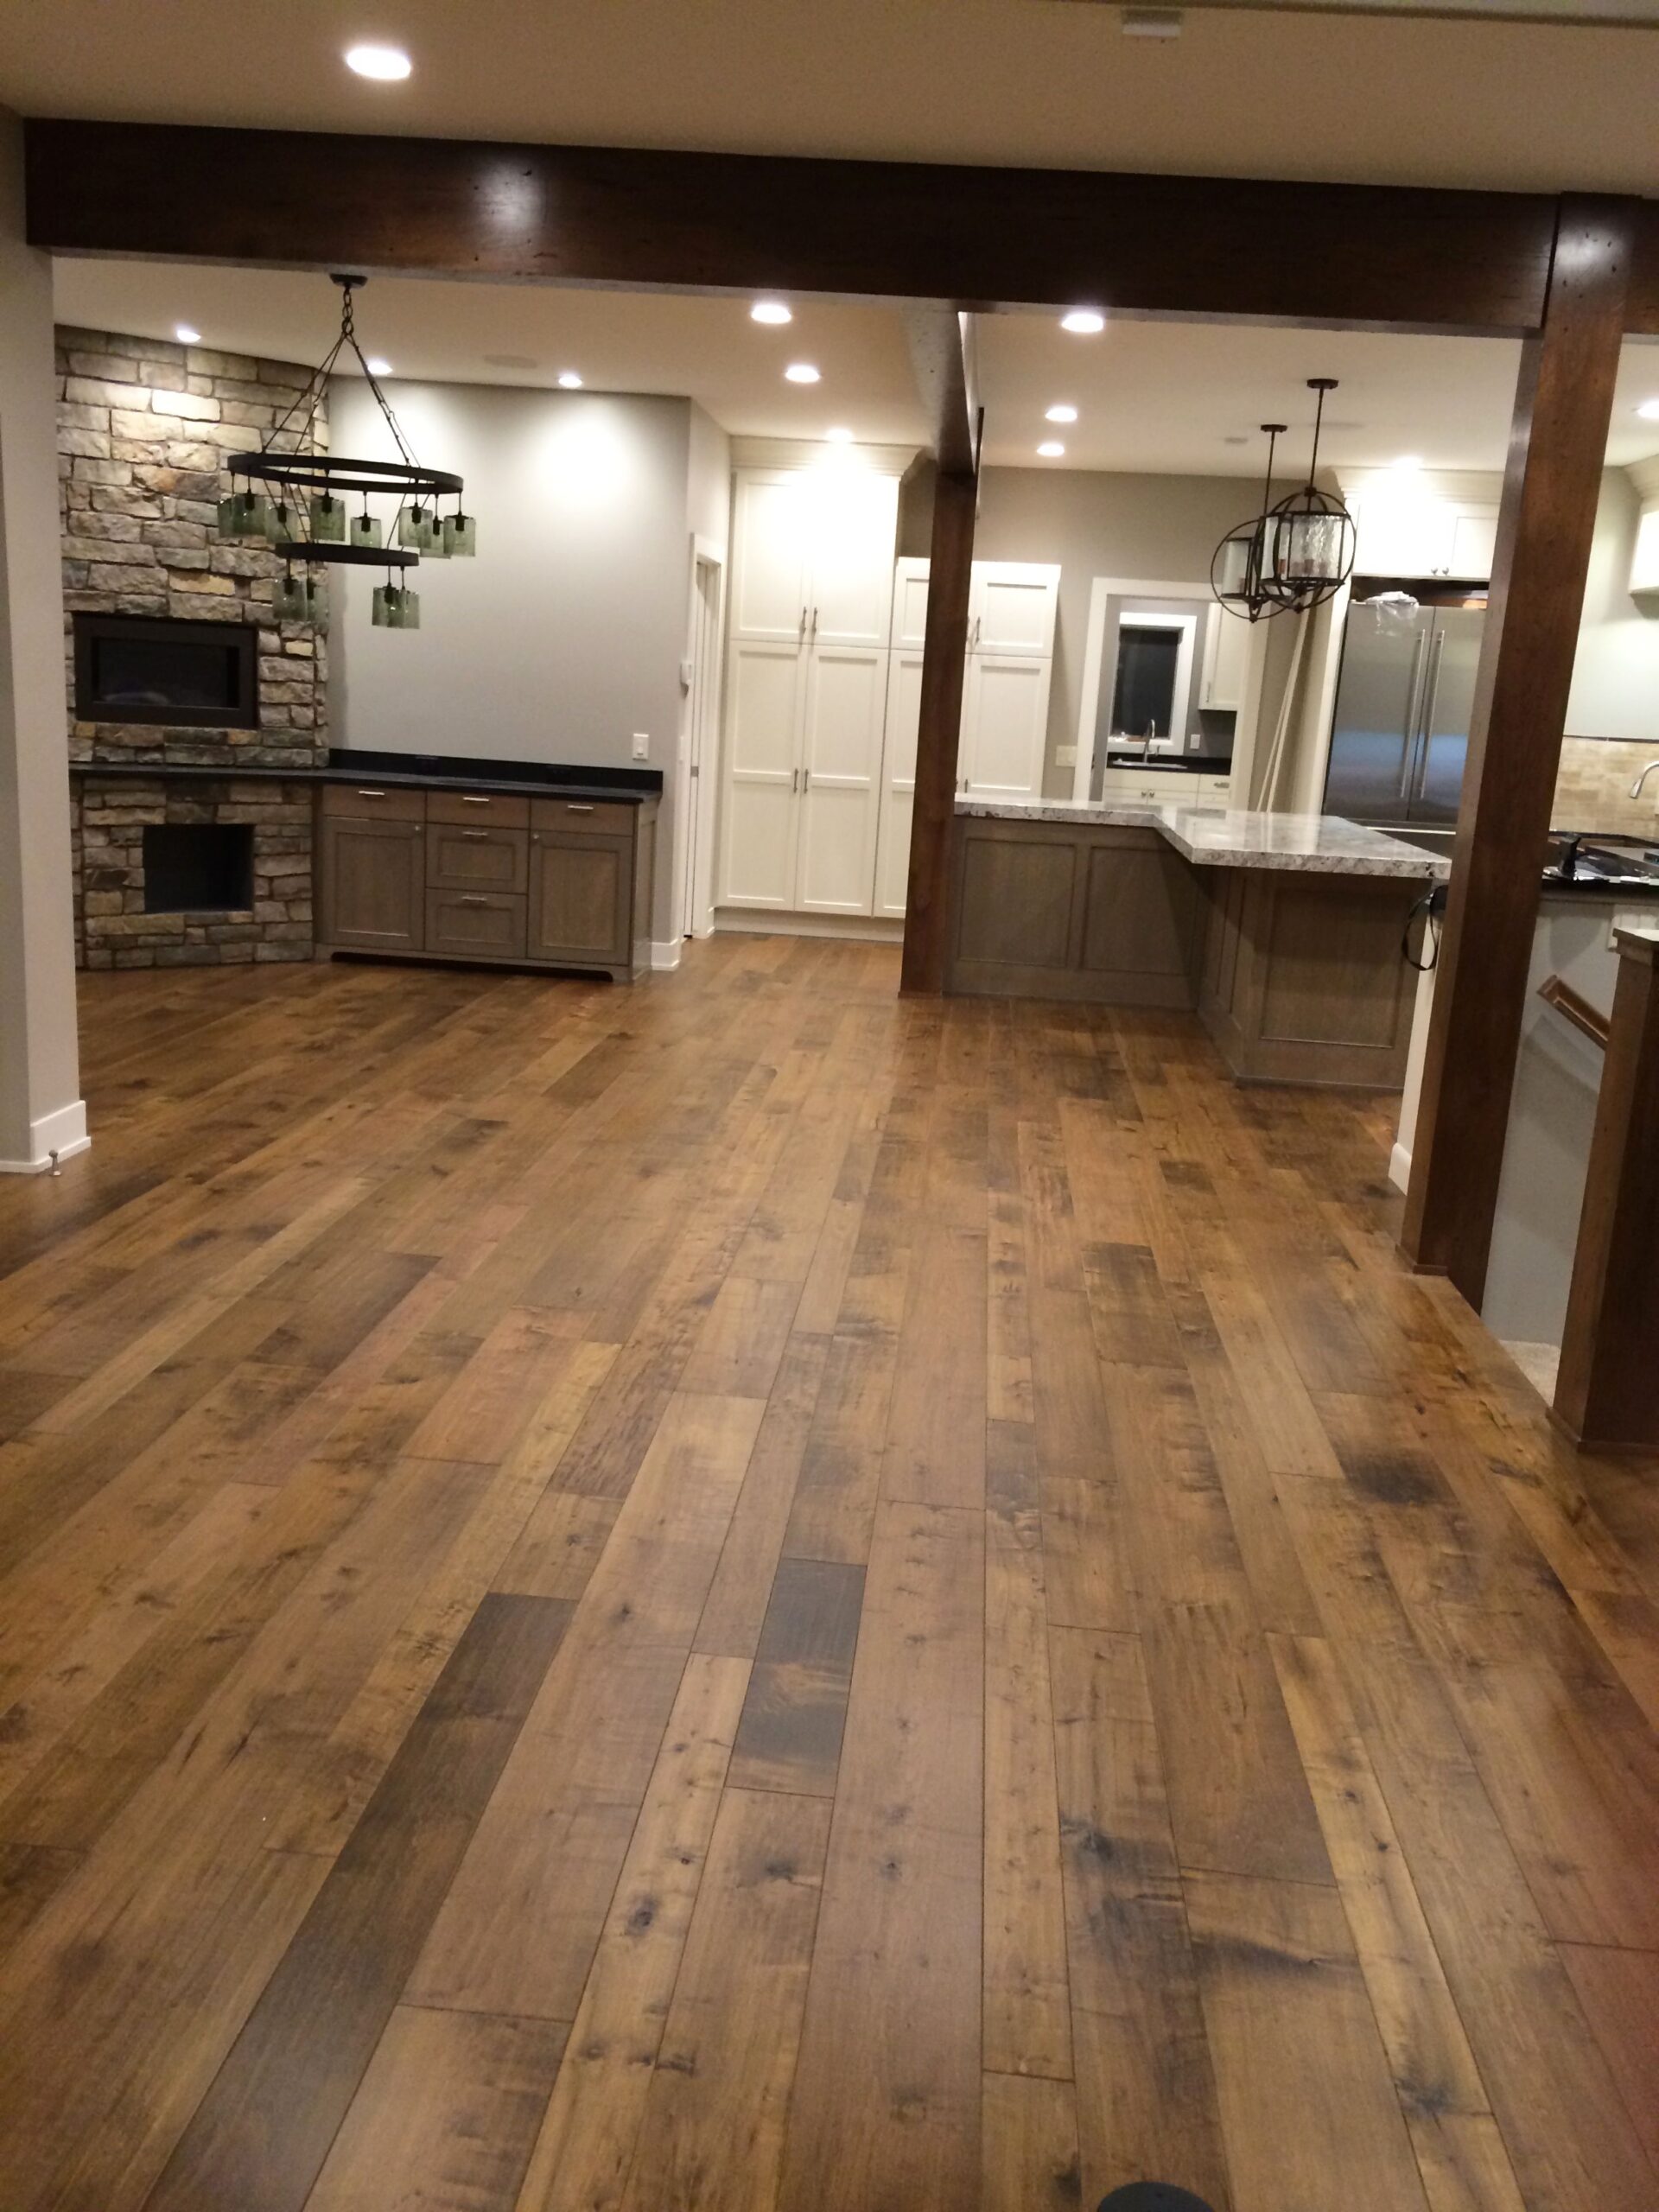 Get the best décor by using hard wood
floors